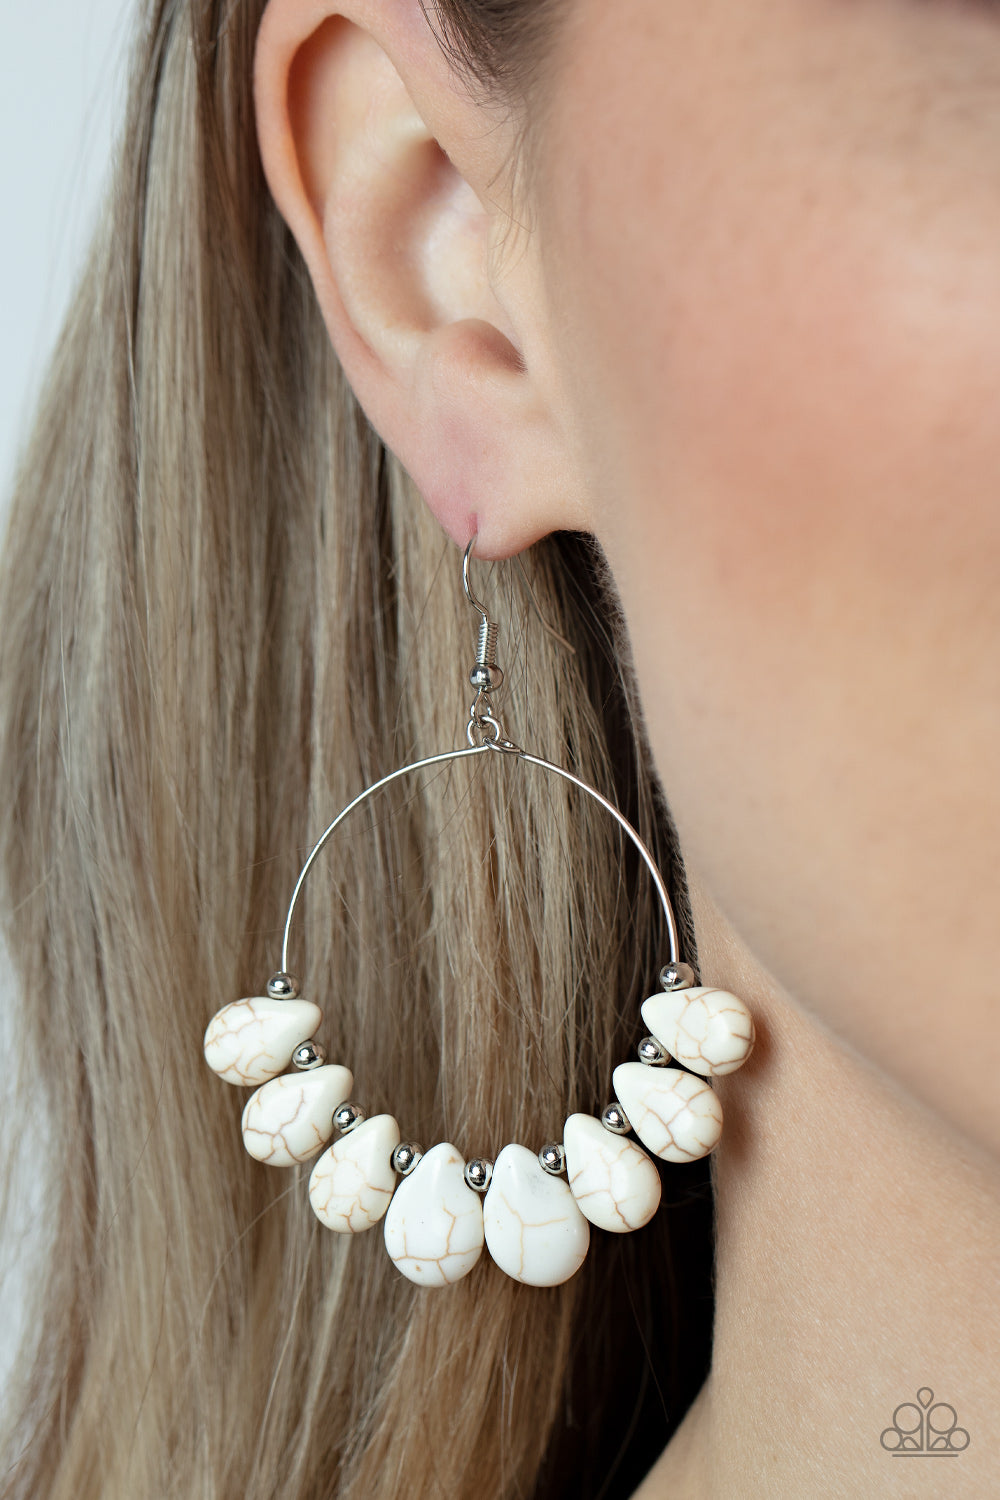 Canyon Quarry White Stone Earring - Paparazzi Accessories  Imperfect white teardrop stones alternate with dainty silver beads along a wire hoop, resulting in an adventurous fringe. Earring attaches to a standard fishhook fitting.  Sold as one pair of earrings.